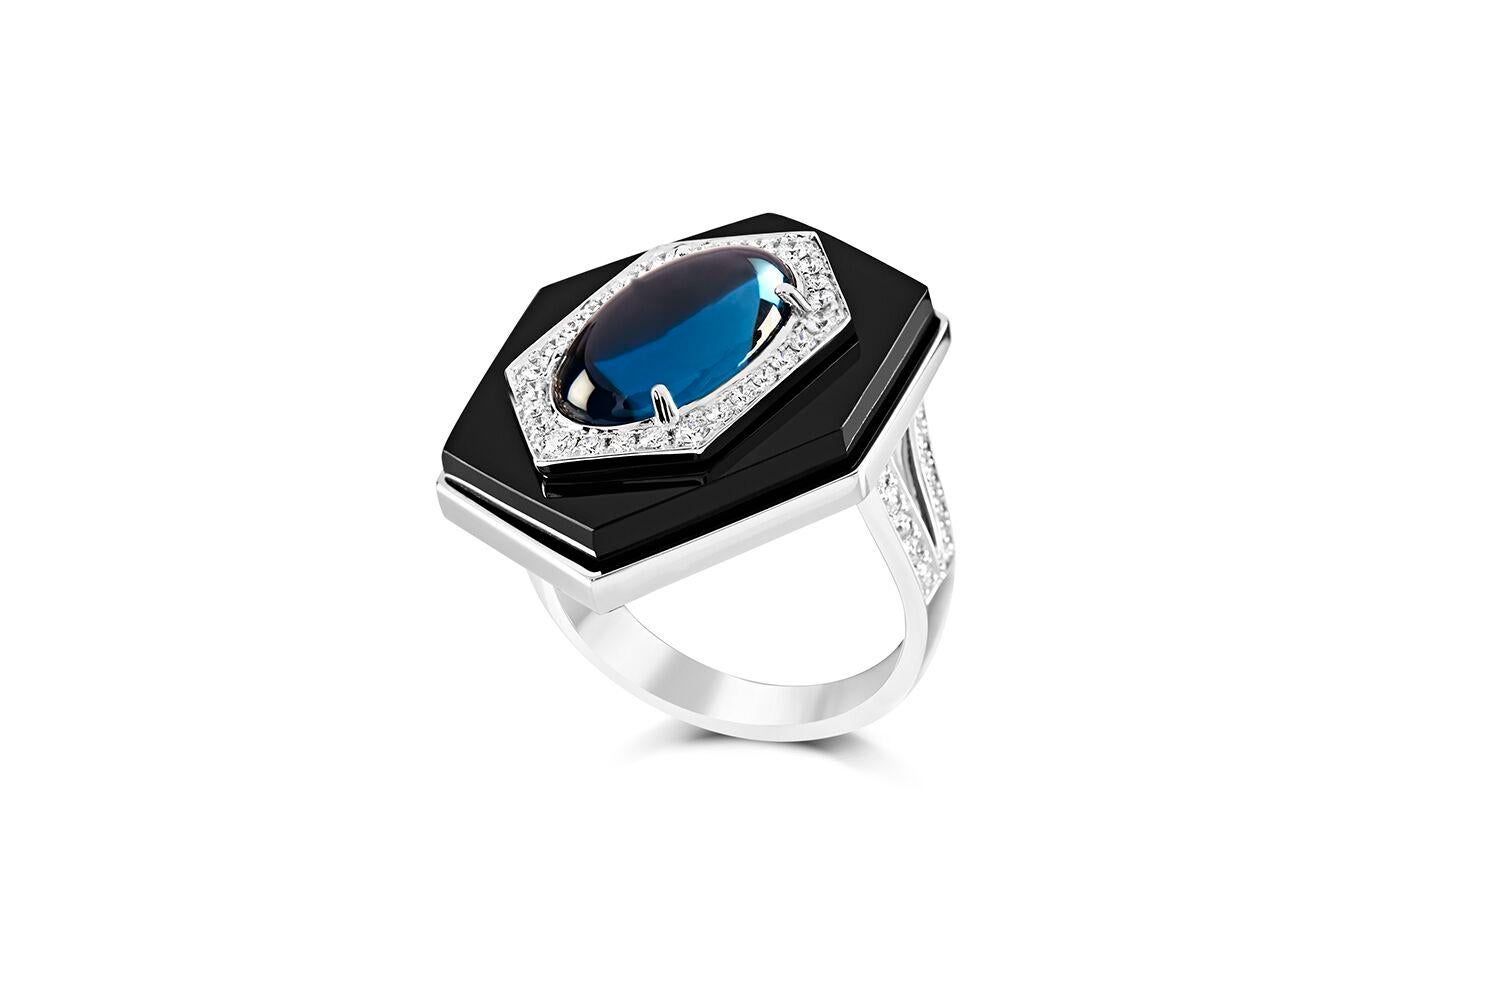 Ananya Celeste Ring set with Topaz , Onyx and Diamonds
Set in 18K White gold

Total diamond weight: 0.56 ct
Color: F-G
Clarity: VVS1

Total blue topaz weight: 5.15 ct